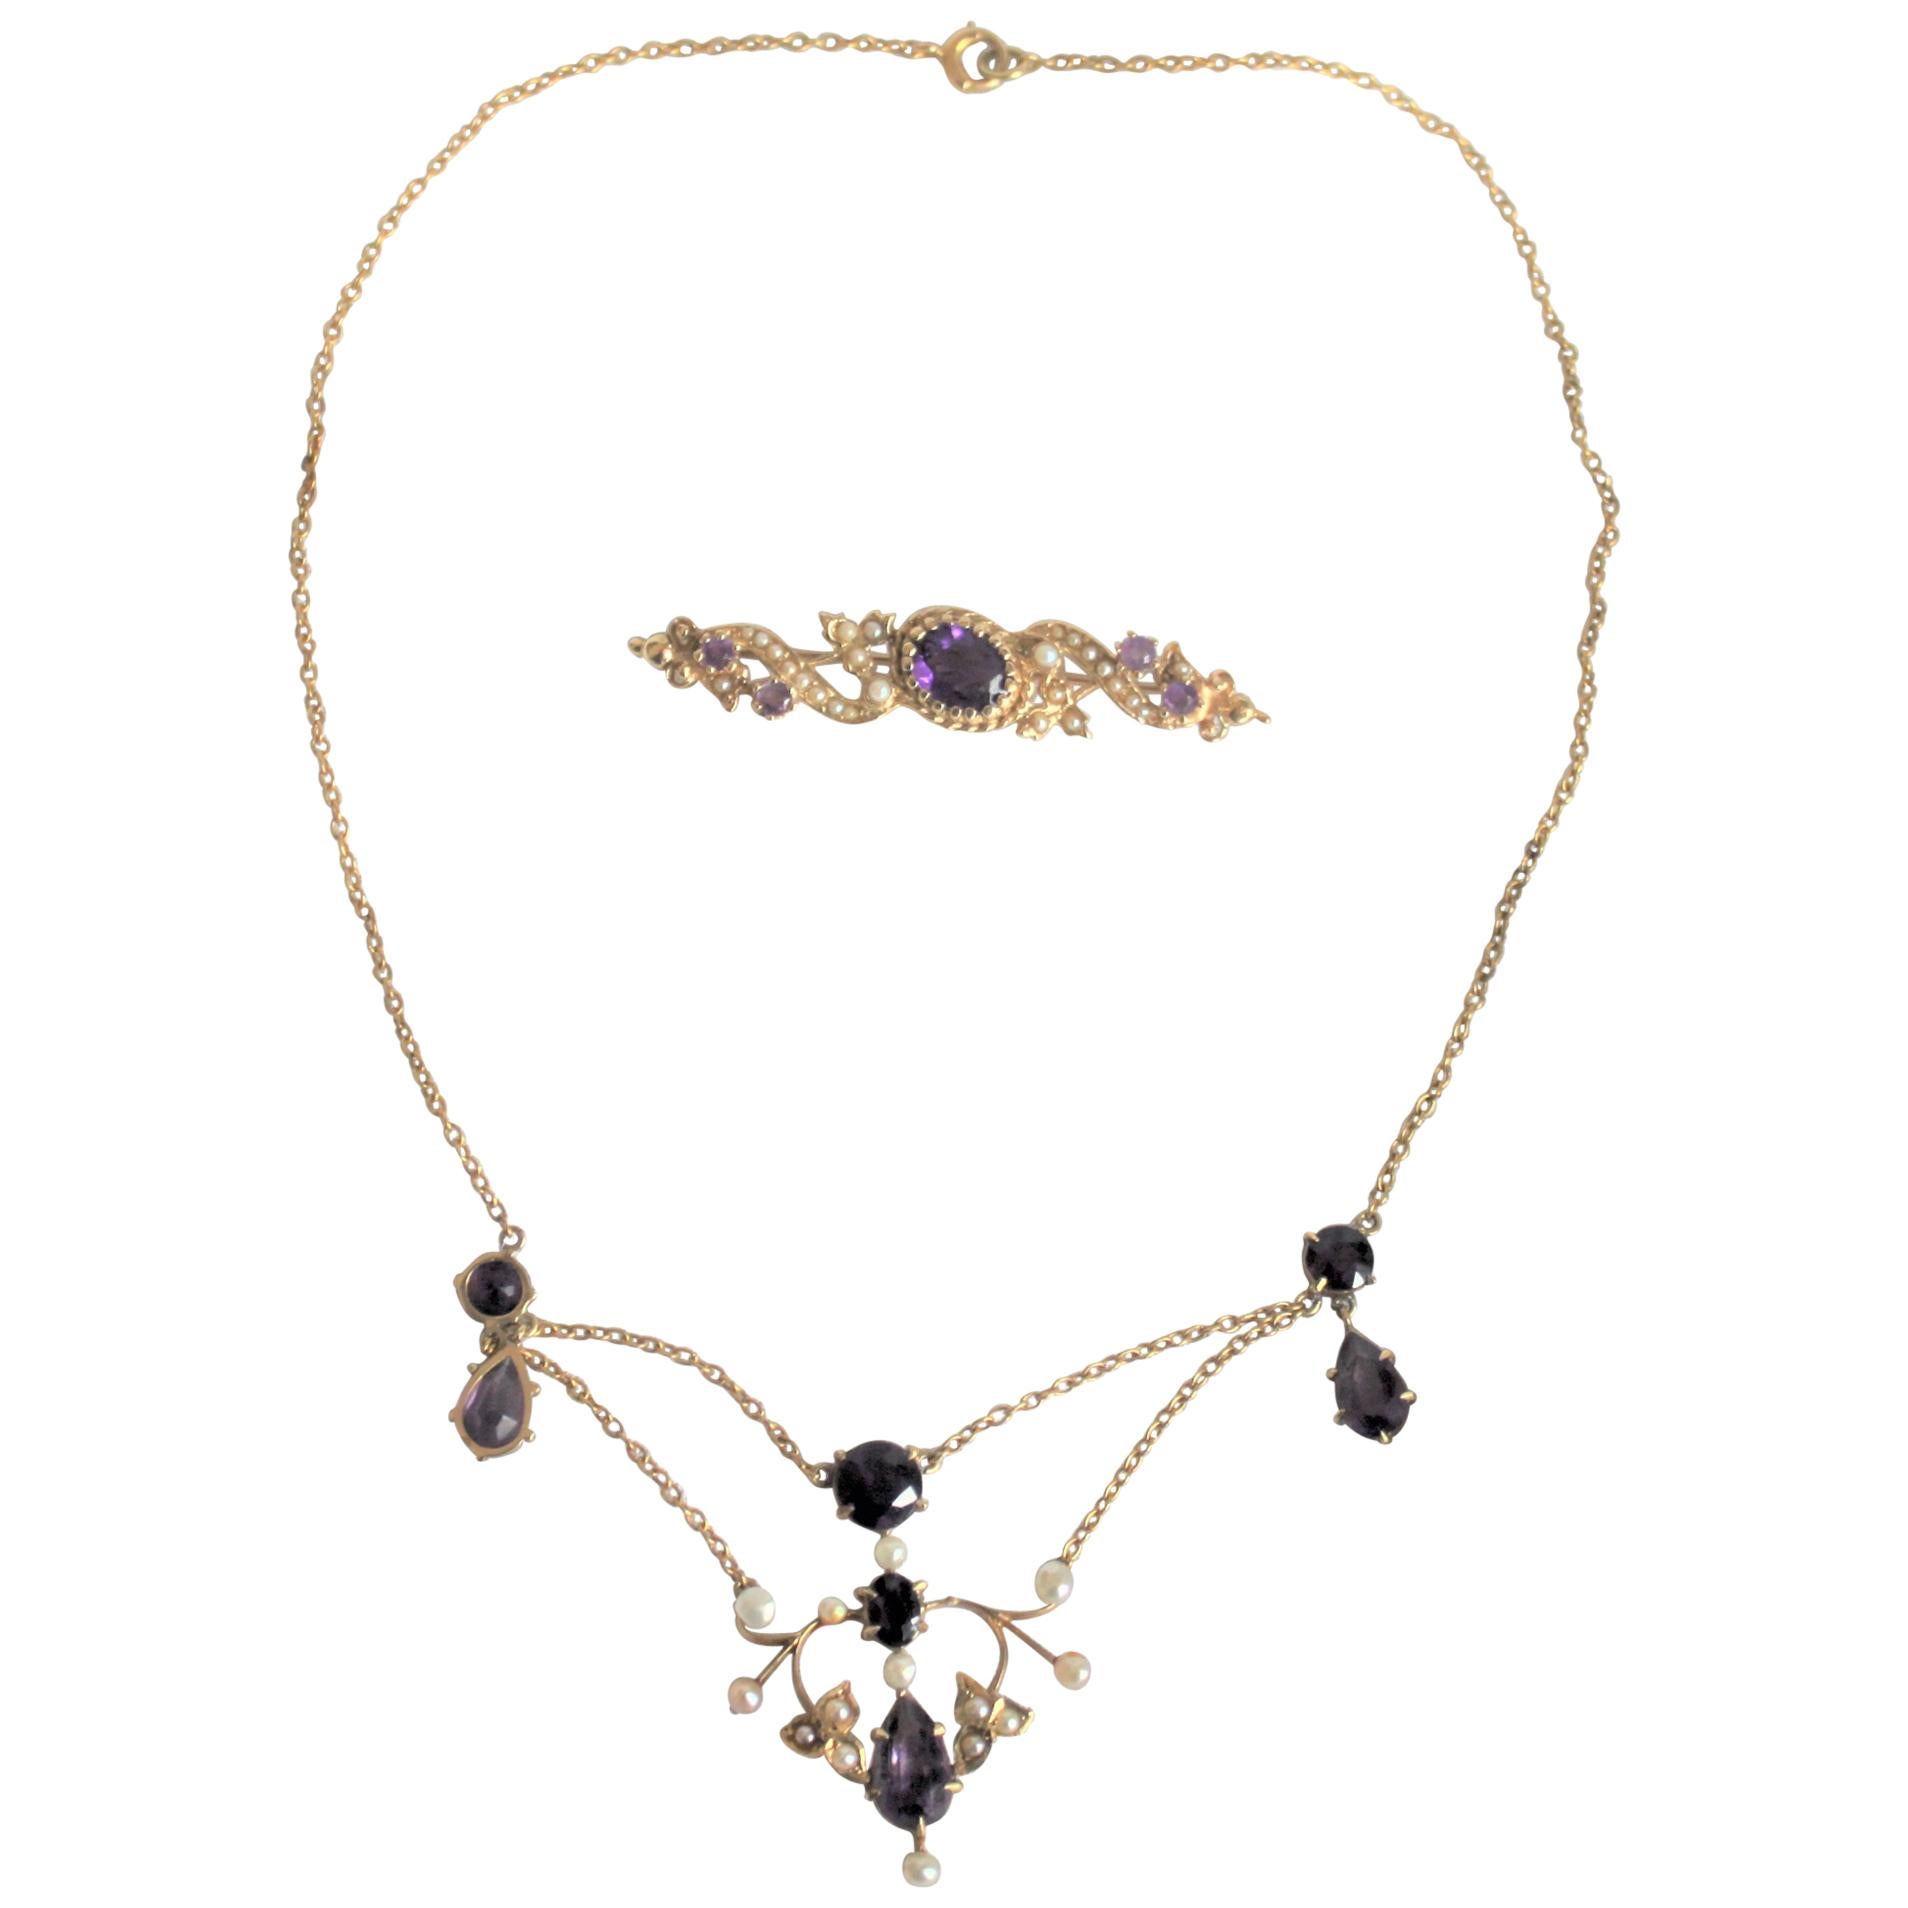 Antique 14-Karat Yellow Gold, Amethyst and Seed Pearl Necklace and Brooch